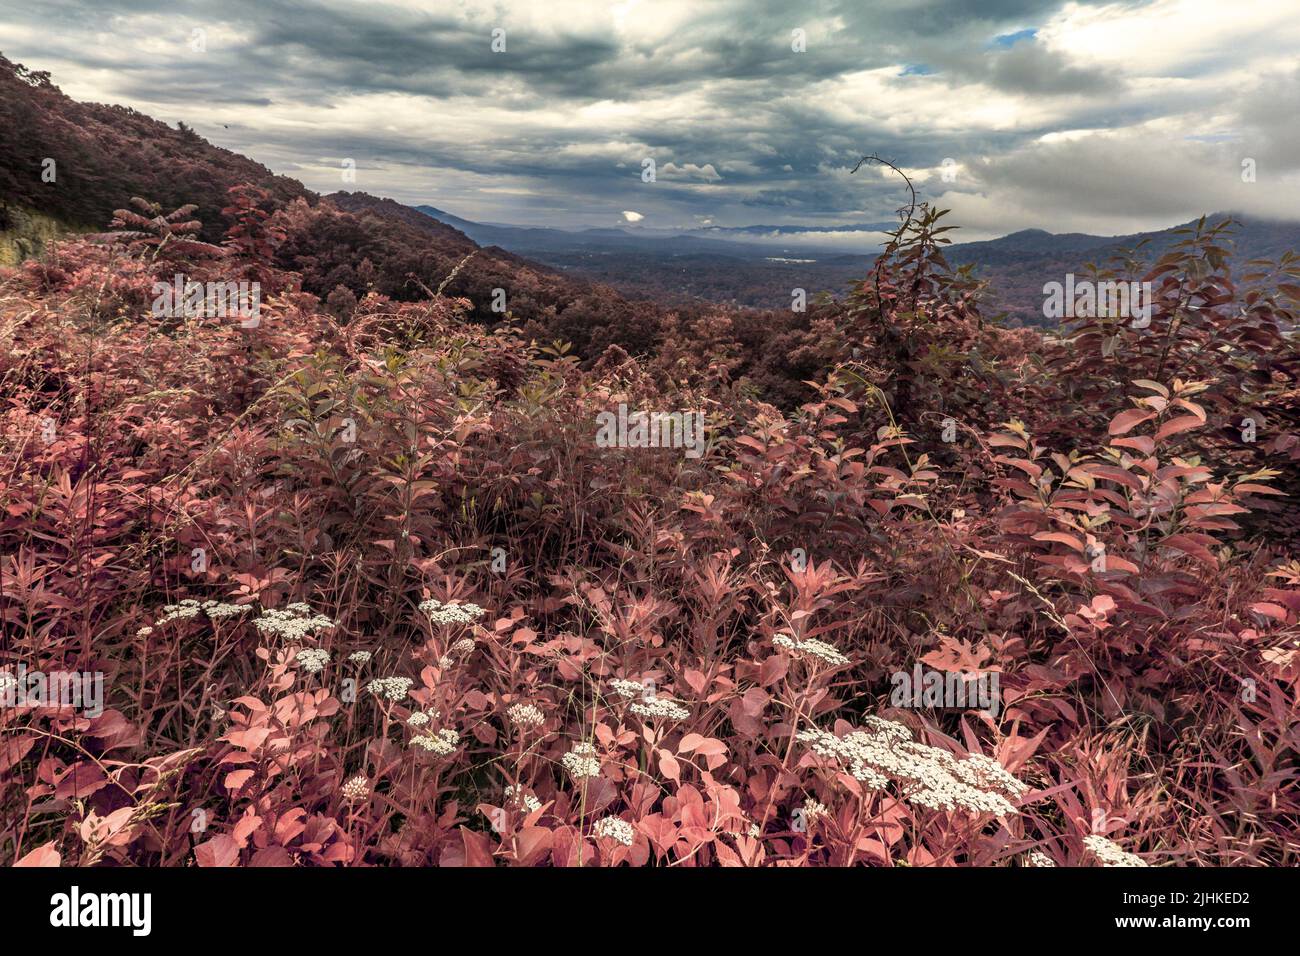 A carpet of green foliage looks red with infrared photography, at Haw Creek Overlook on the Blue Ridge Parkway in Asheville, NC, USA. Stock Photo